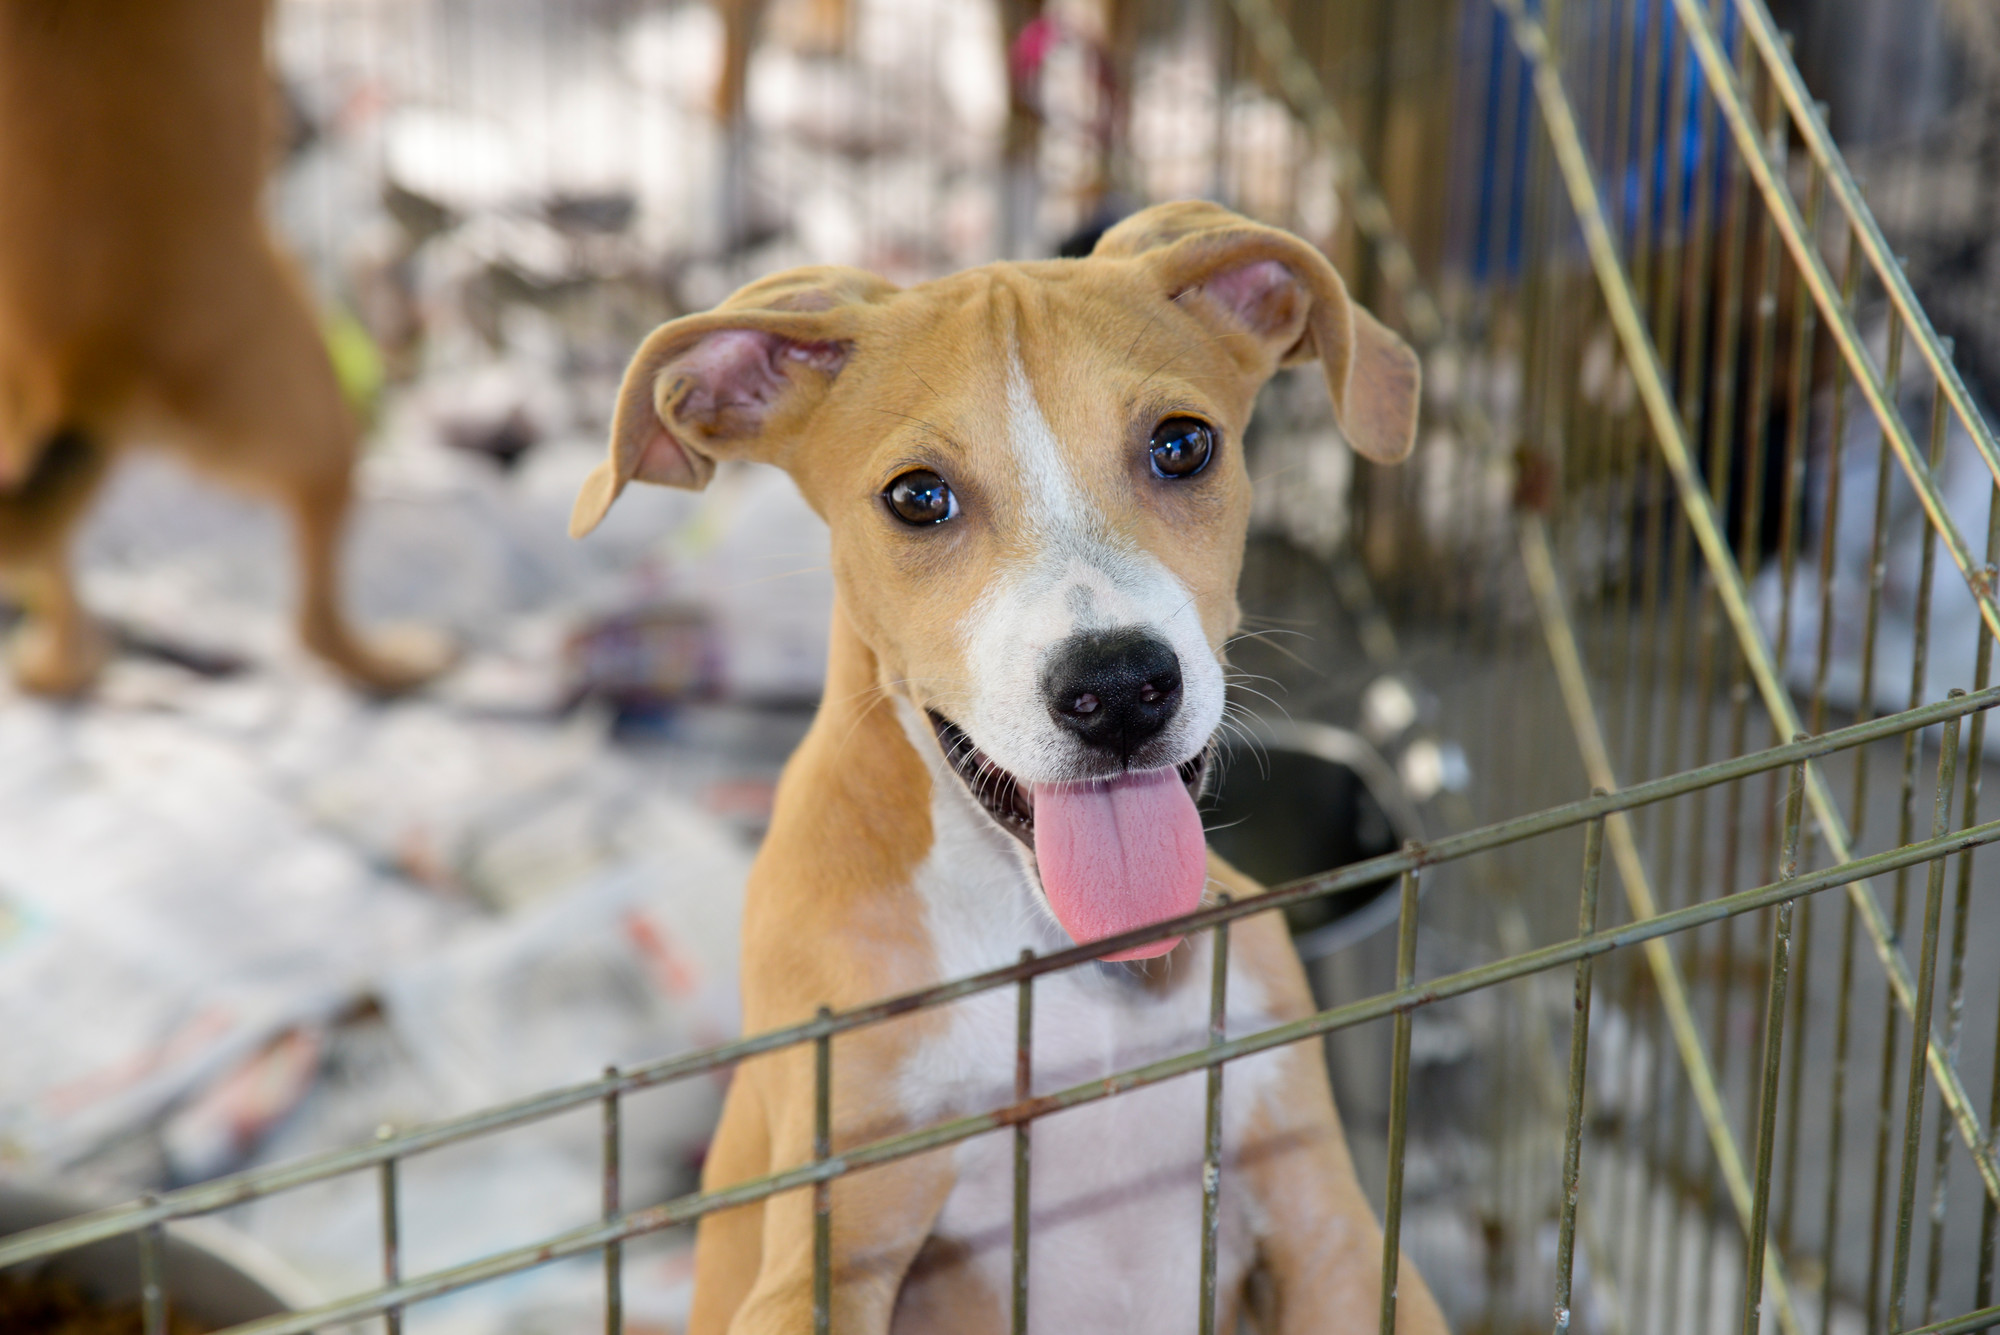 This cute pup was up for adoption at the Ruff House Rescue tent.(Penny Frondelli/Herald)